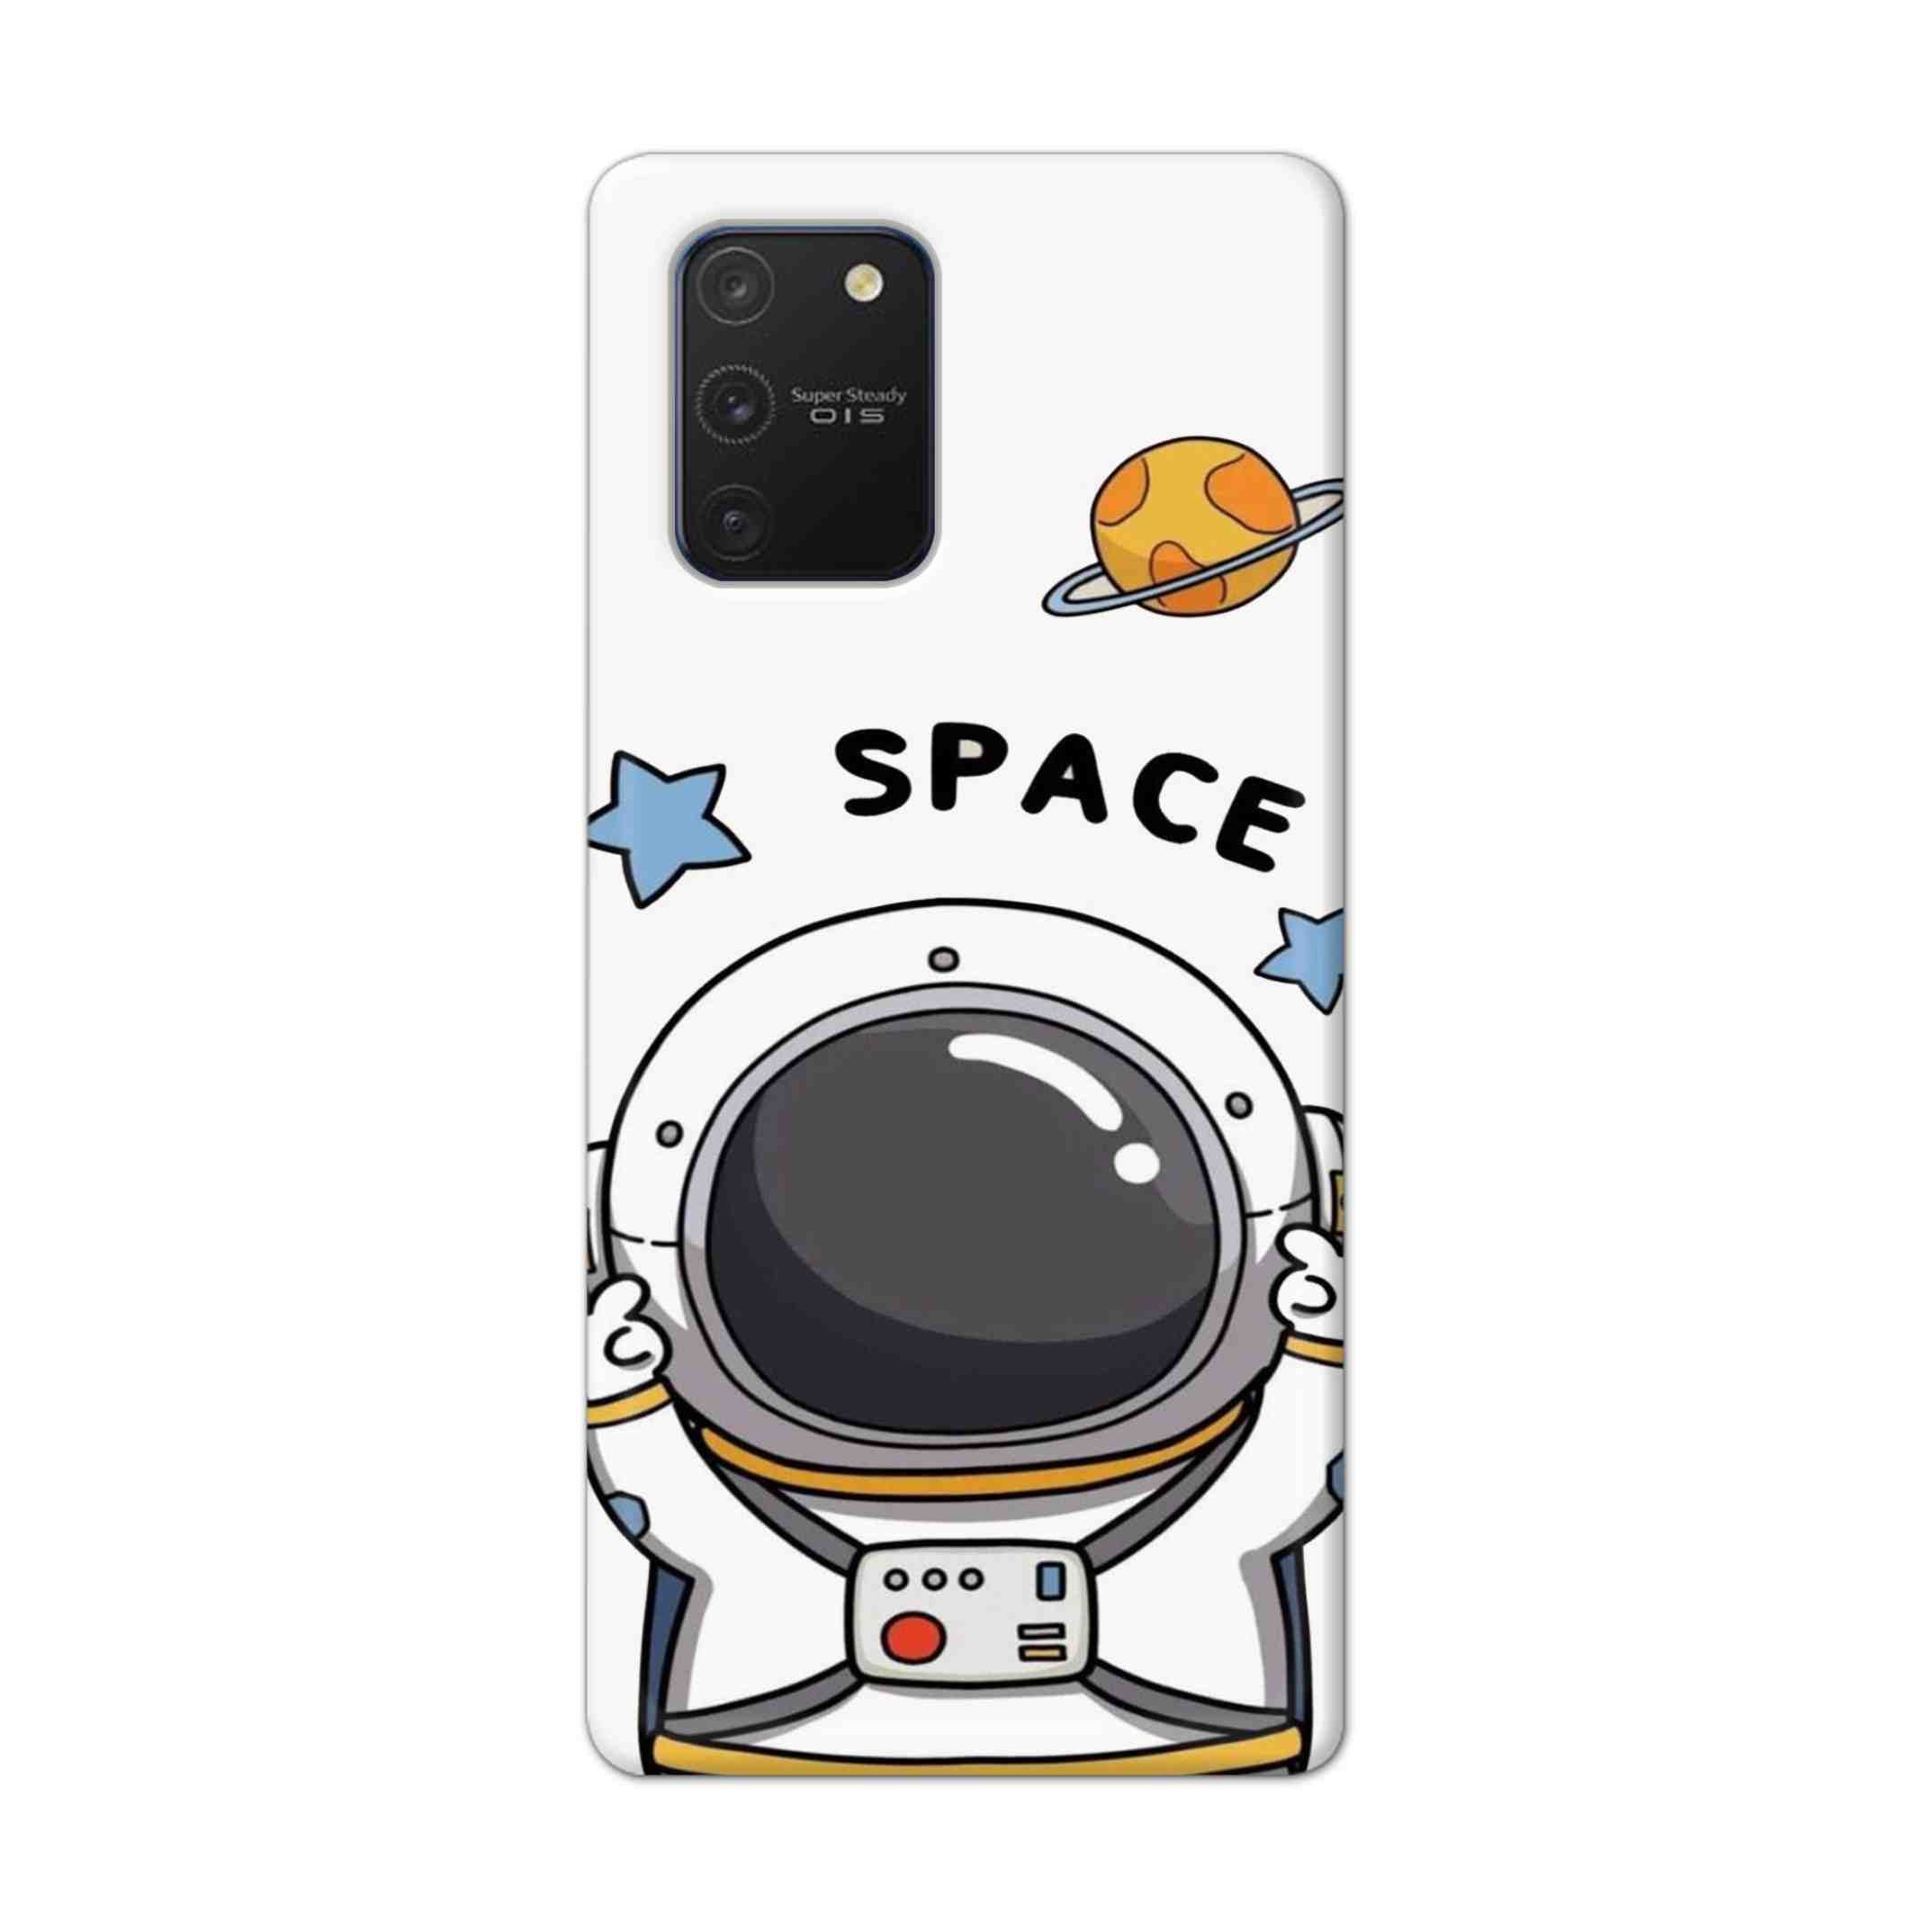 Buy Little Astronaut Hard Back Mobile Phone Case Cover For Samsung Galaxy Note 10 Lite (NEW) Online